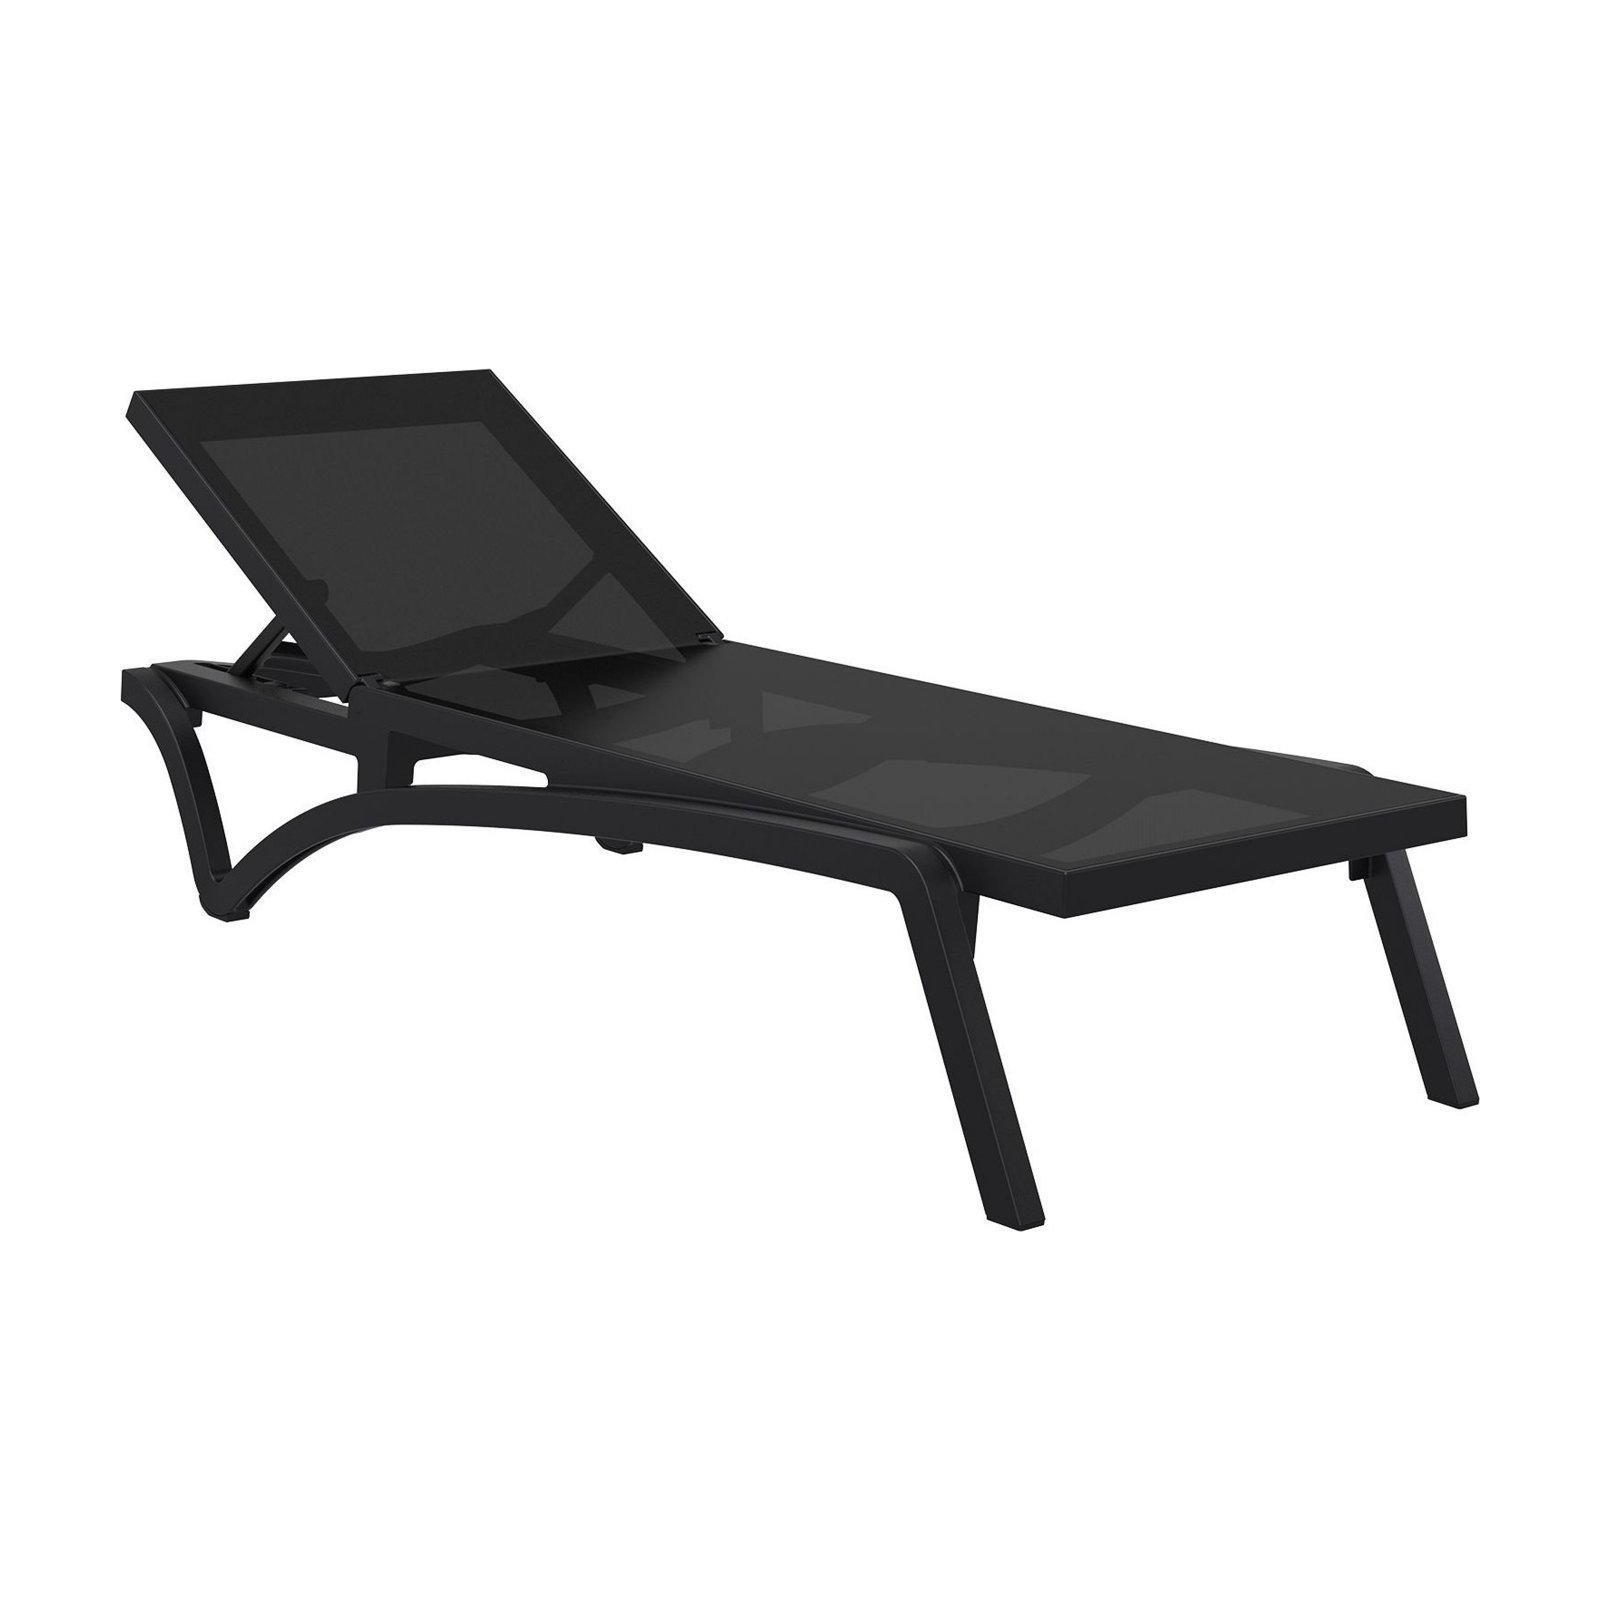 Compamia Pacific Chaise Lounge with Black Sling in Black - image 1 of 11